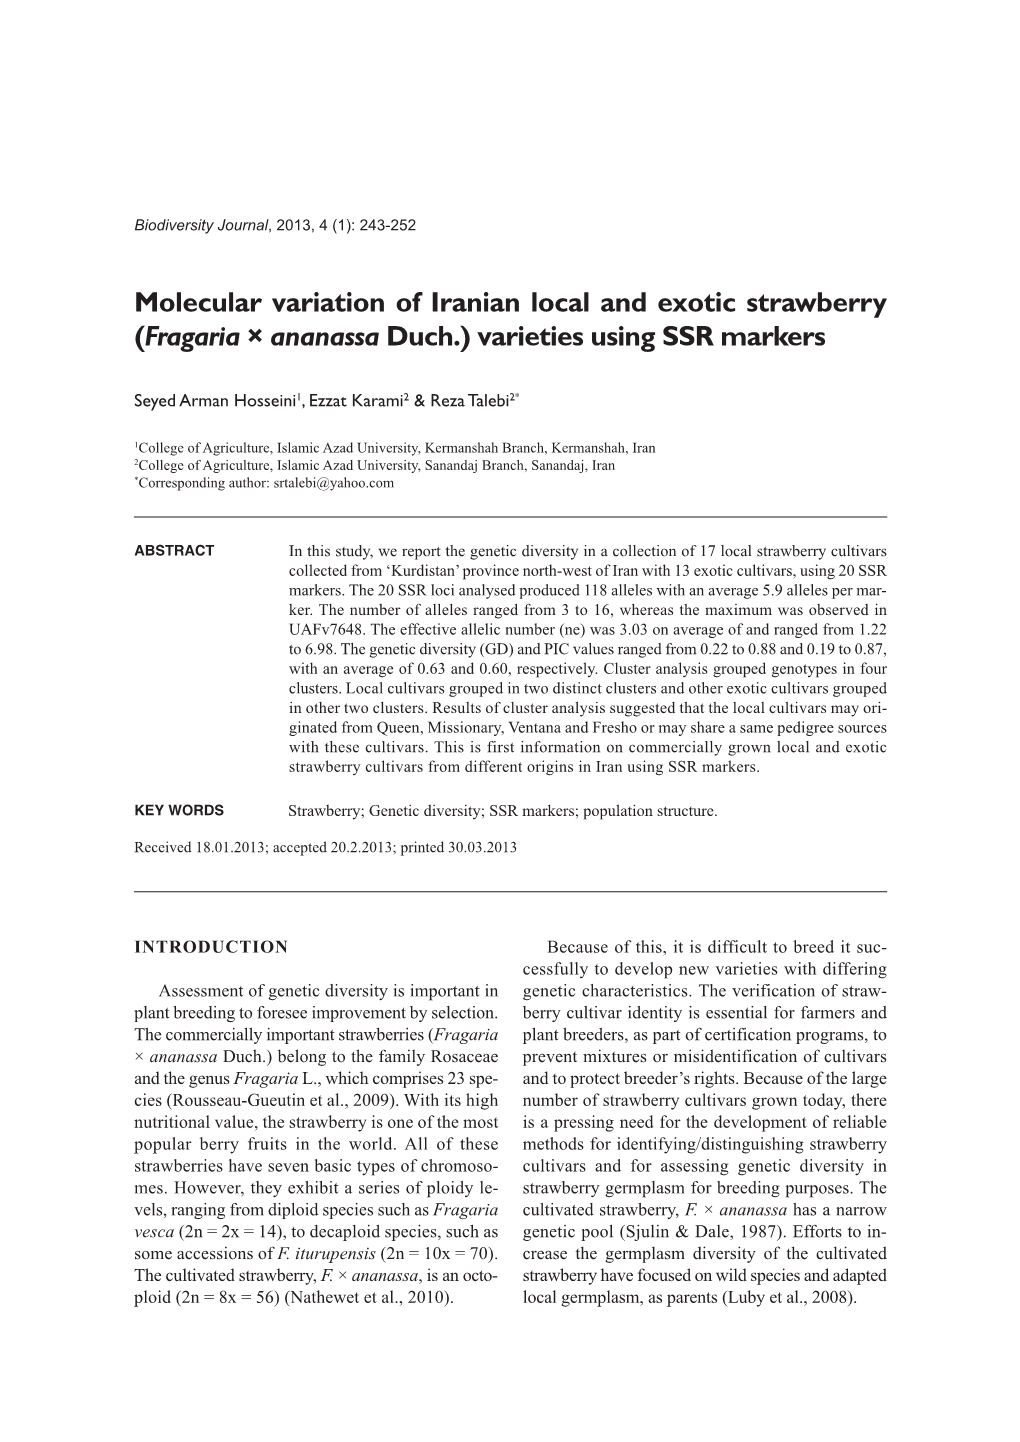 Molecular Variation of Iranian Local and Exotic Strawberry (Fragaria × Ananassa Duch.) Varieties Using SSR Markers